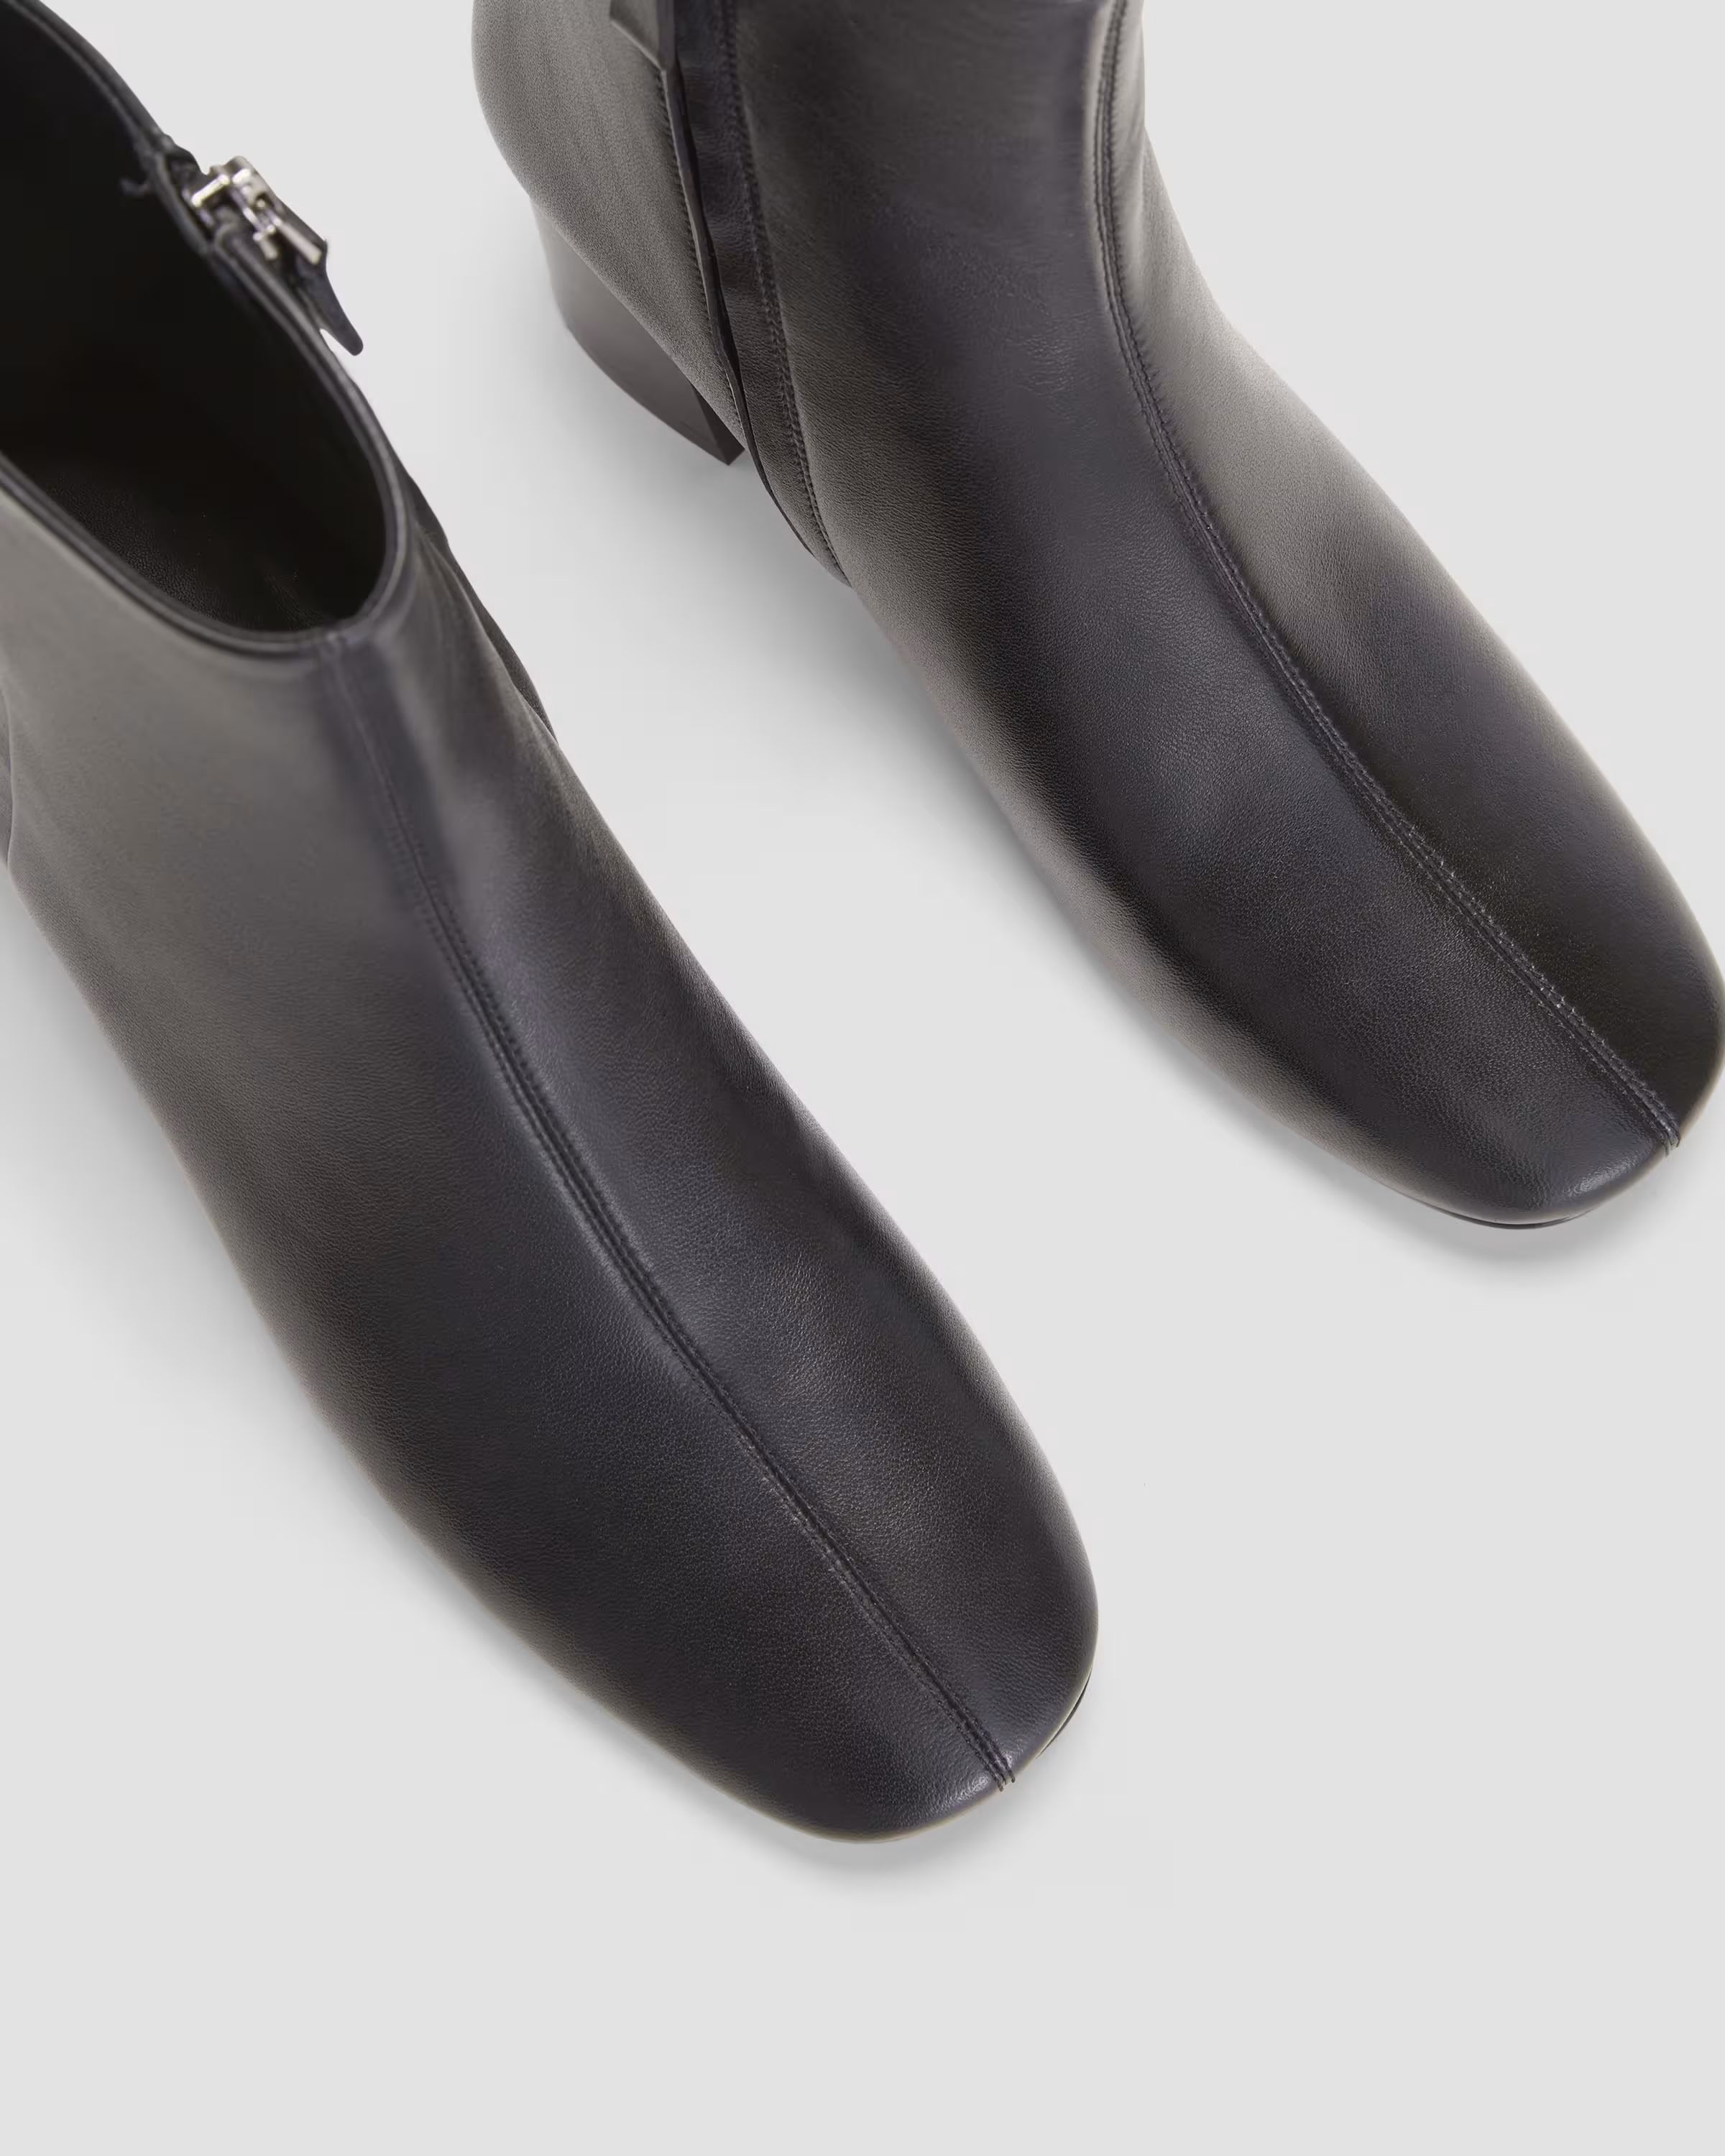 The Day Boot | Everlane